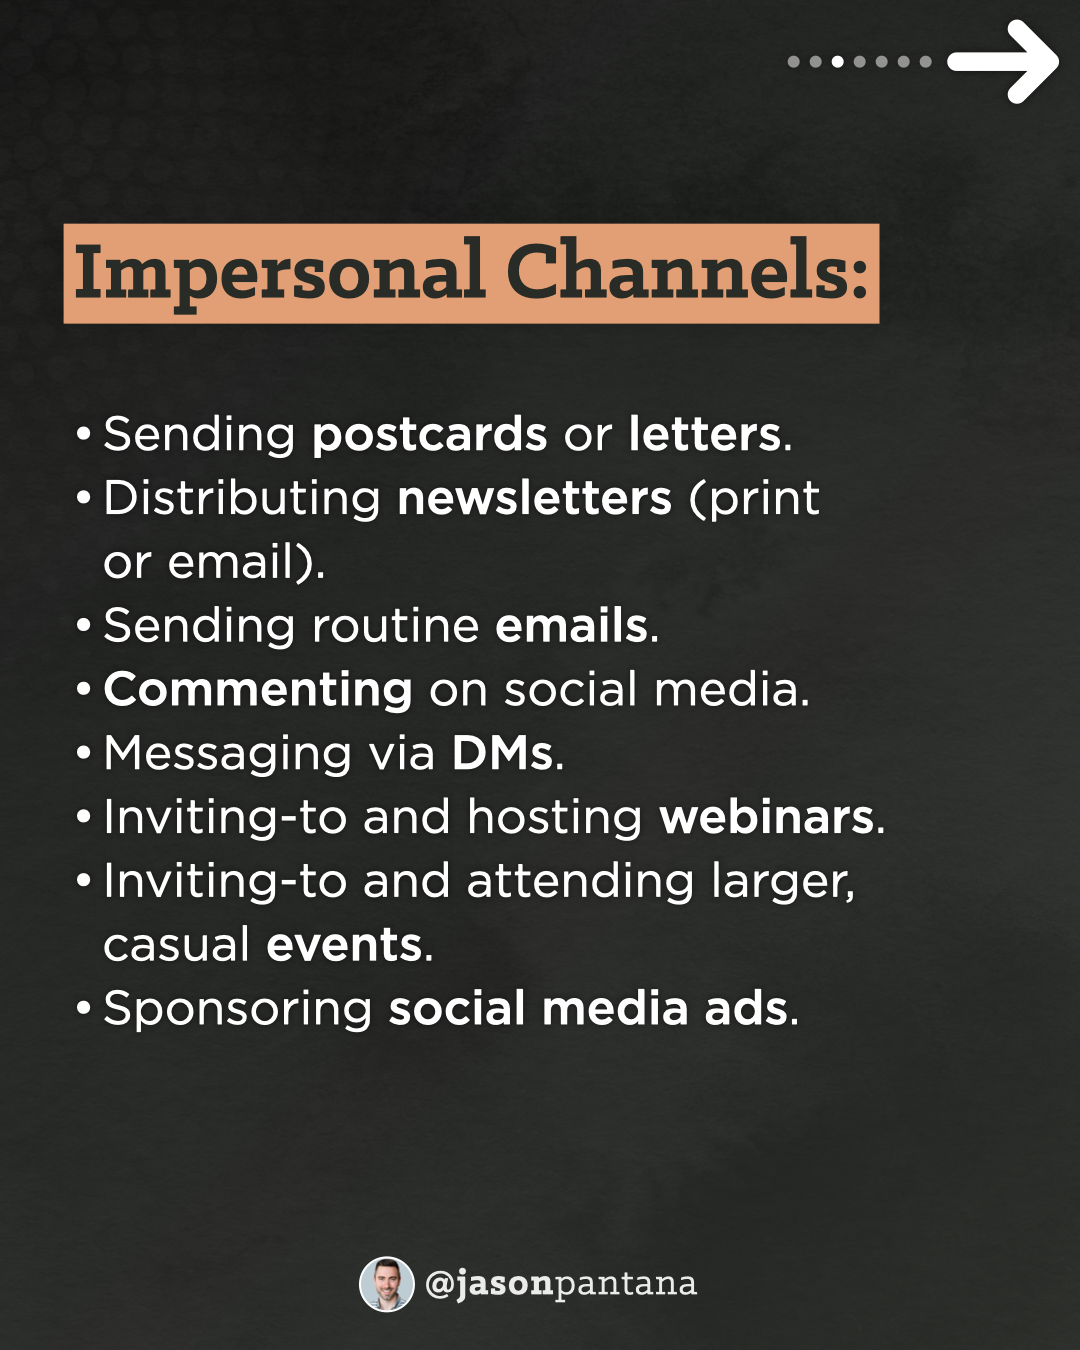 3 - Impersonal marketing channels list.png